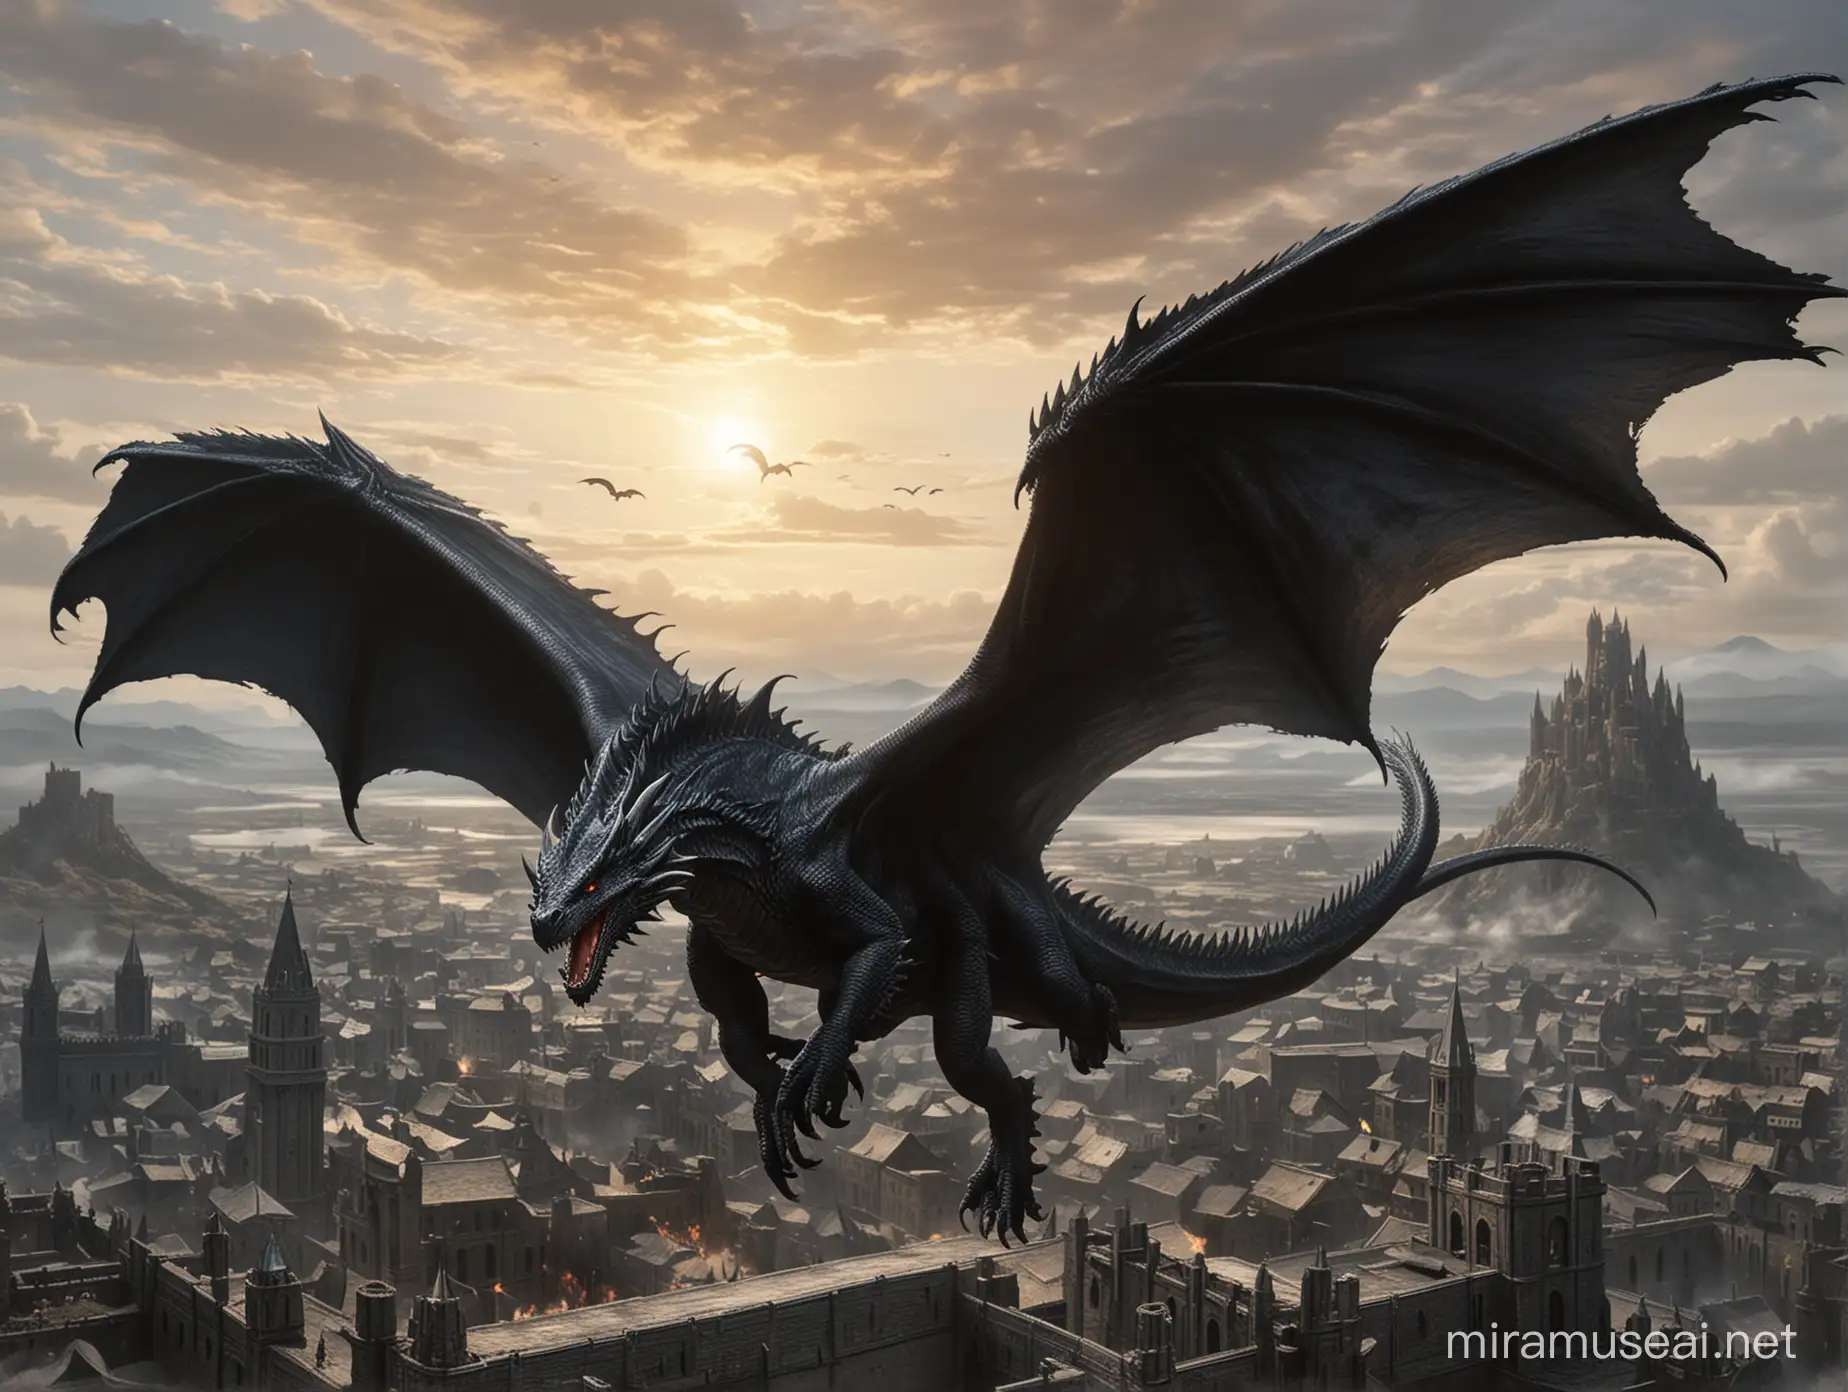 balerion the black wrath. the biggest dragon that ever existed. huge, black with a long tail and huge wings. dragon is as big as a medieval town that he flying above.